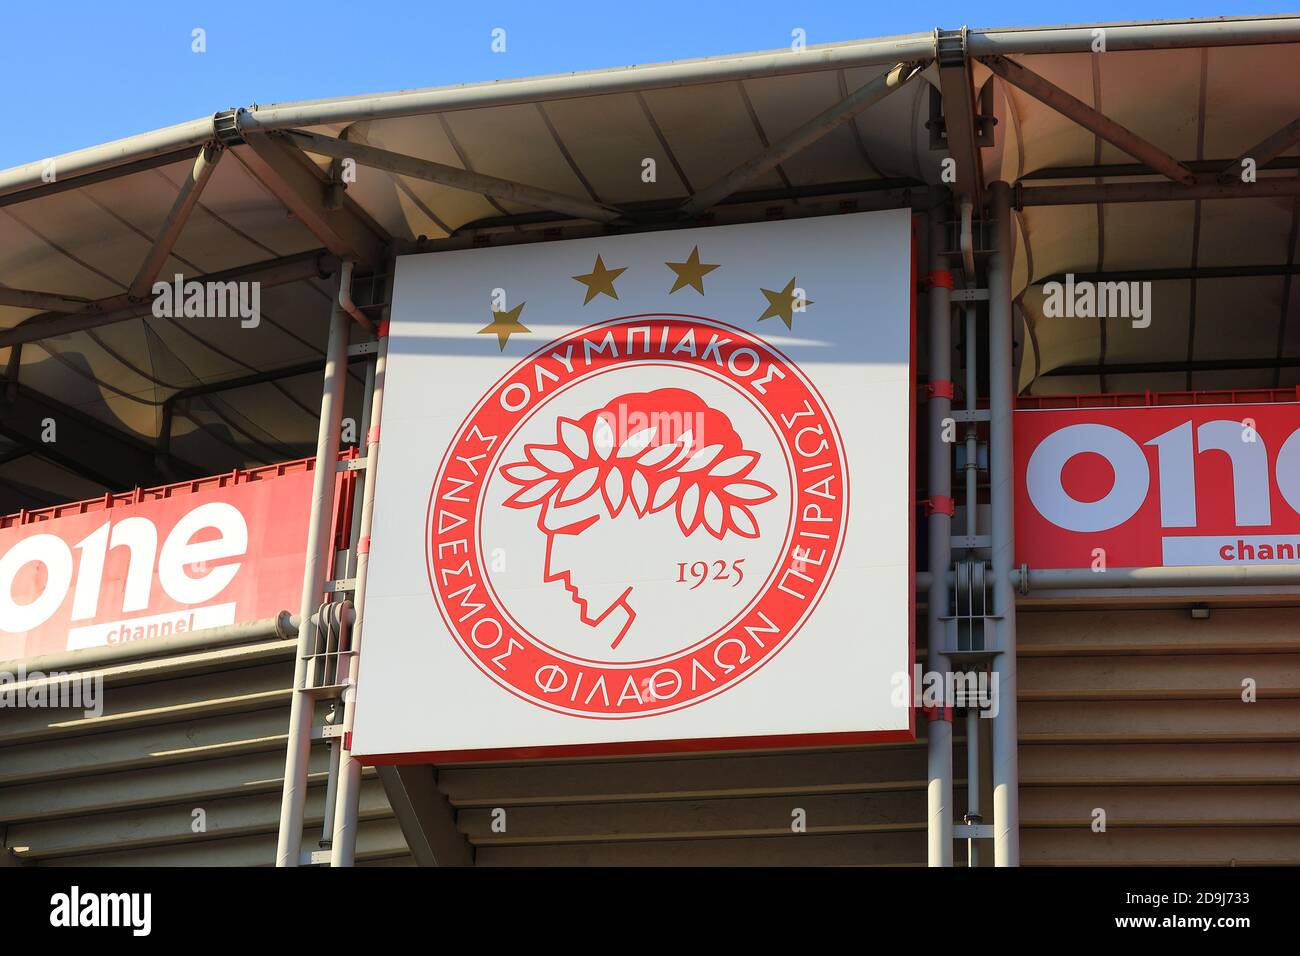 The crest of Olympiacos adorns the Karaiskakis Stadium.  Olympiacos is a professional football team in the Greek city of Piraeus. Stock Photo